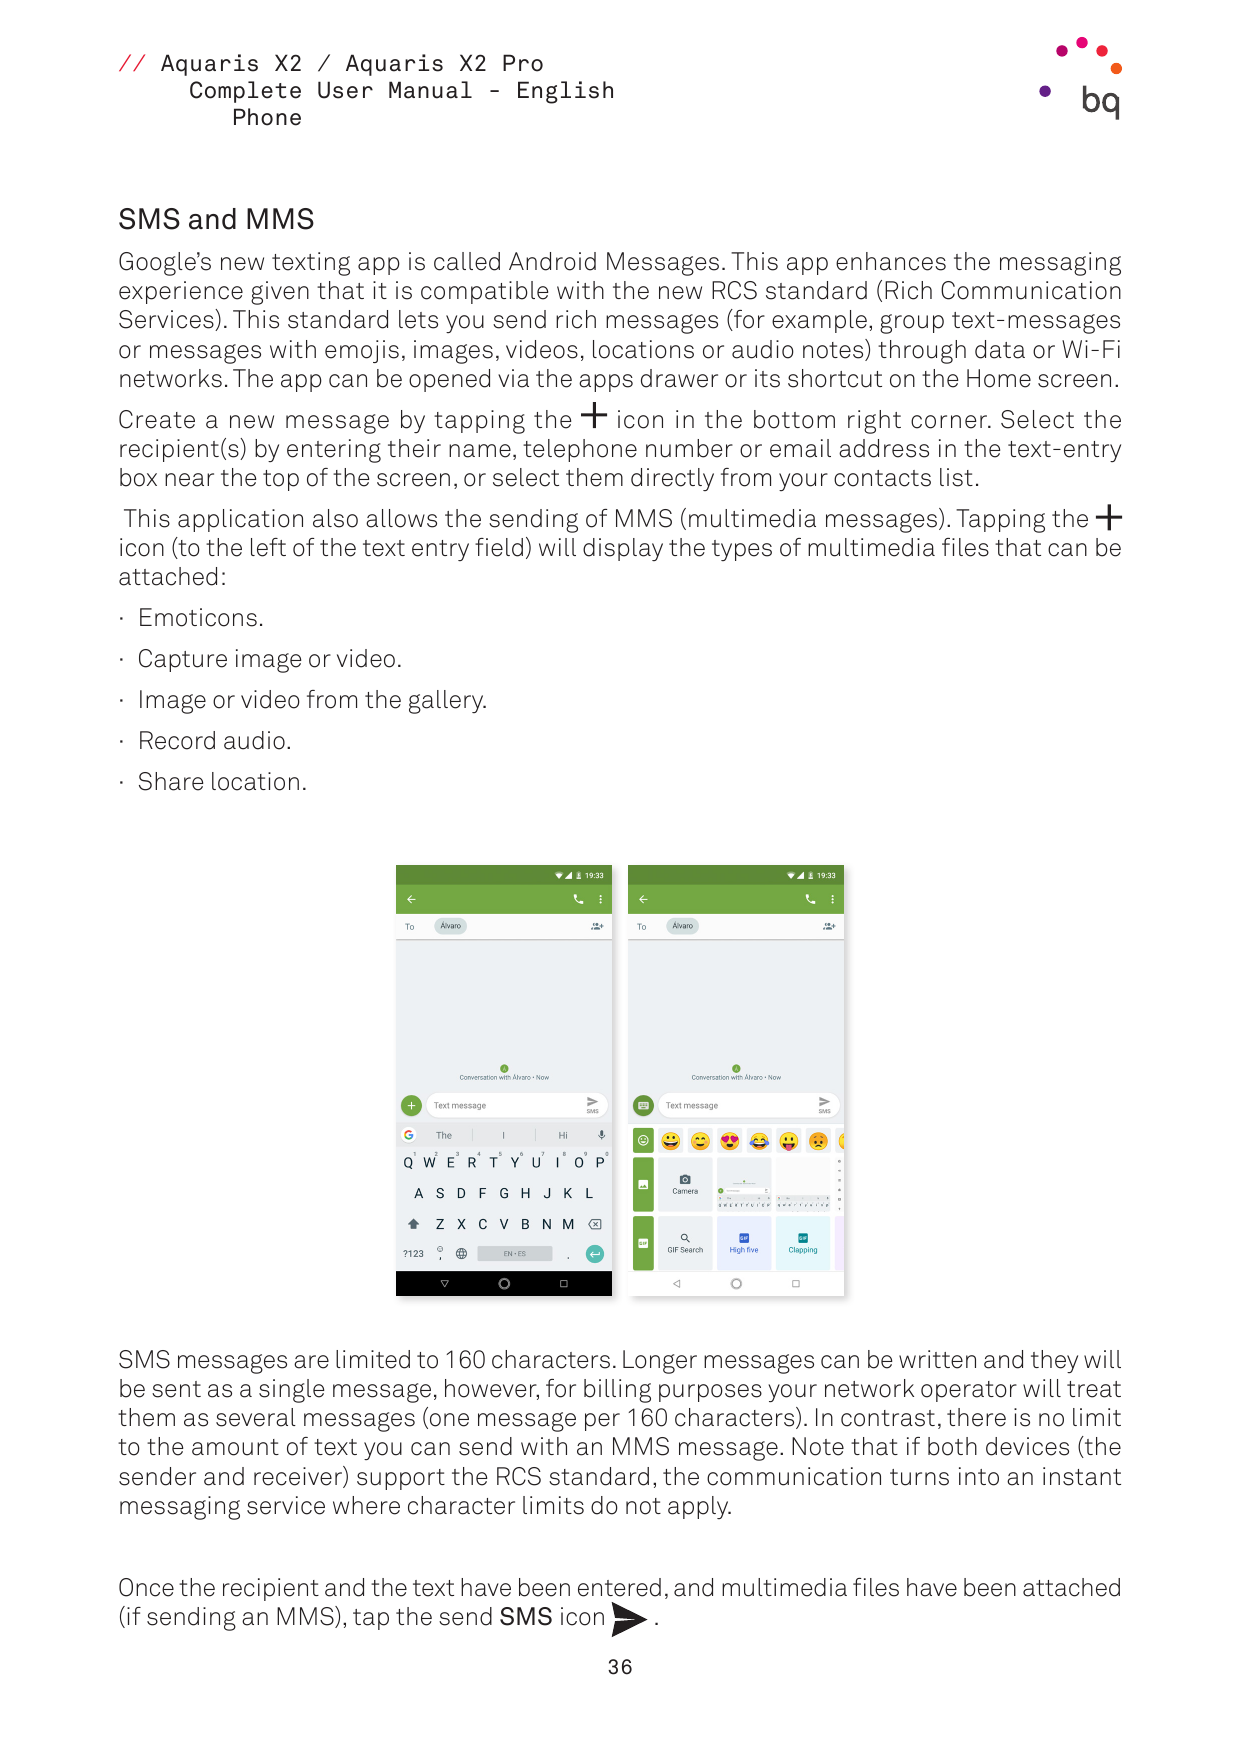 // Aquaris X2 / Aquaris X2 ProComplete User Manual - EnglishPhoneSMS and MMSGoogle’s new texting app is called Android Messages.